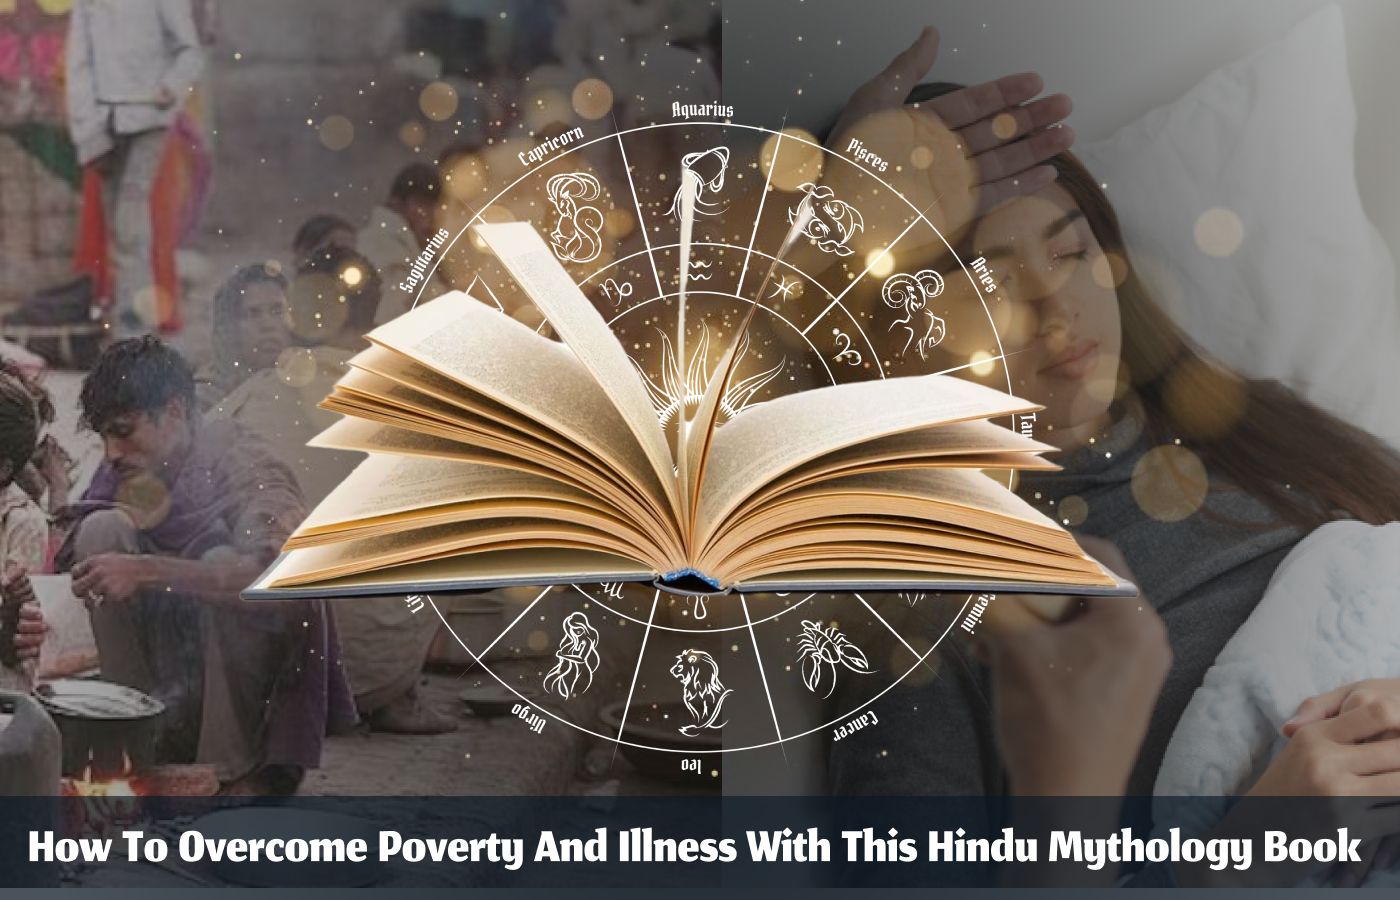 Learn how to overcome poverty and illness with this Hindu mythology book